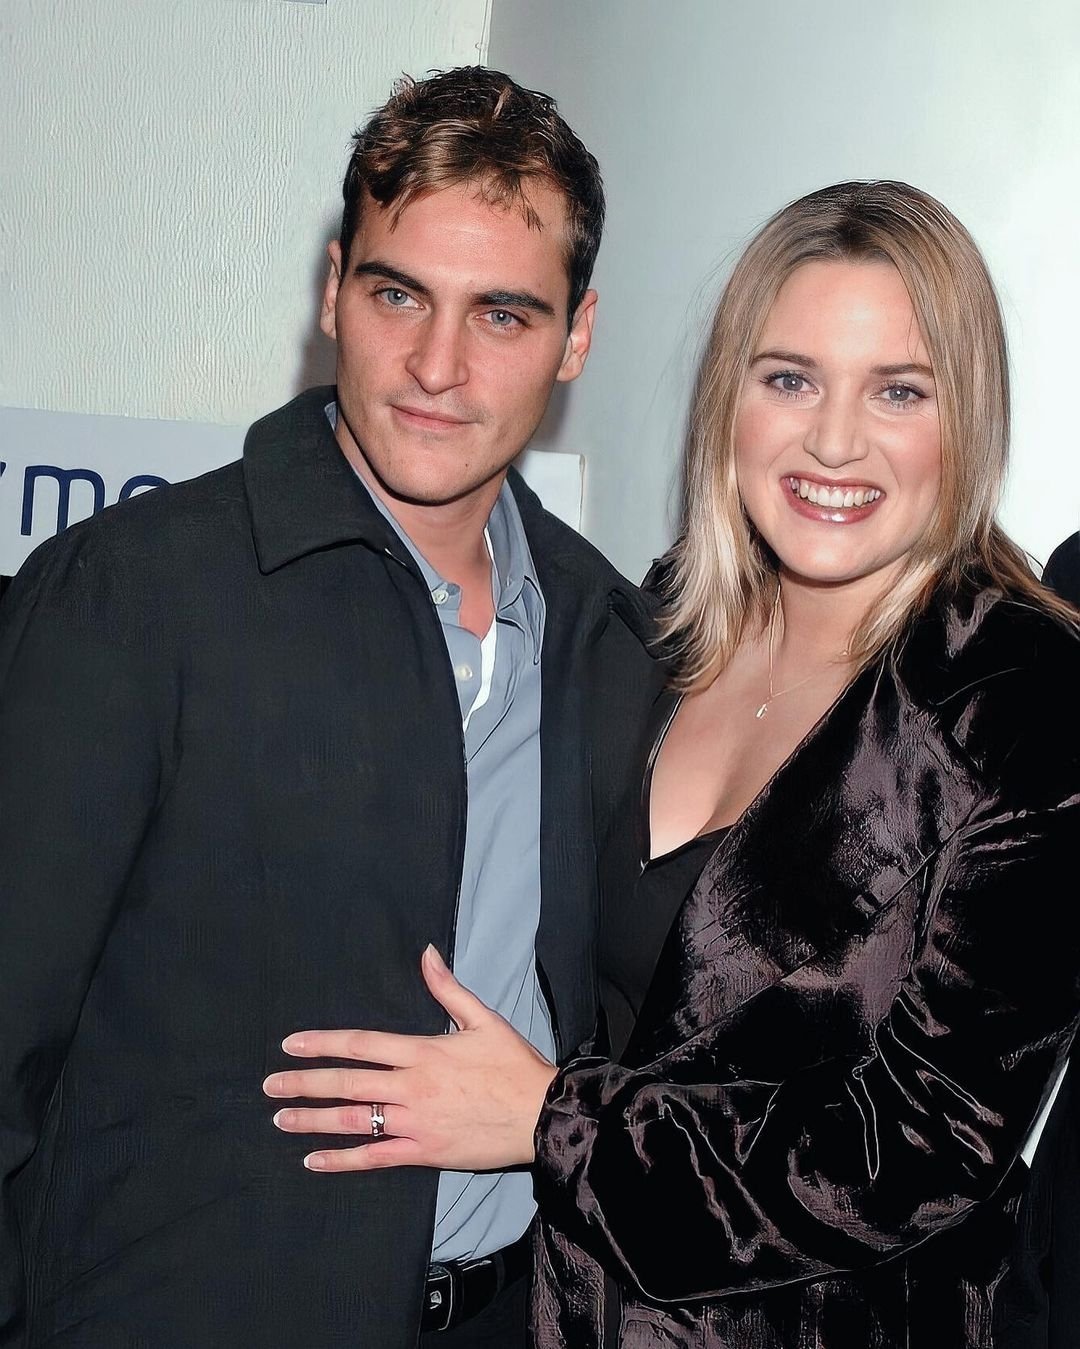 Skriv email Skorpe Lake Taupo Kate Winslet -ology on Twitter: "From instagram: Reposted from  @jokeswitharthur Joaquin and Kate Winslet at “Quills” movie London  Premiere, November 2000 ✨ #joaquinphoenix #katewinslet #quills #quillsmovie  https://t.co/cdNAYds8aj" / Twitter